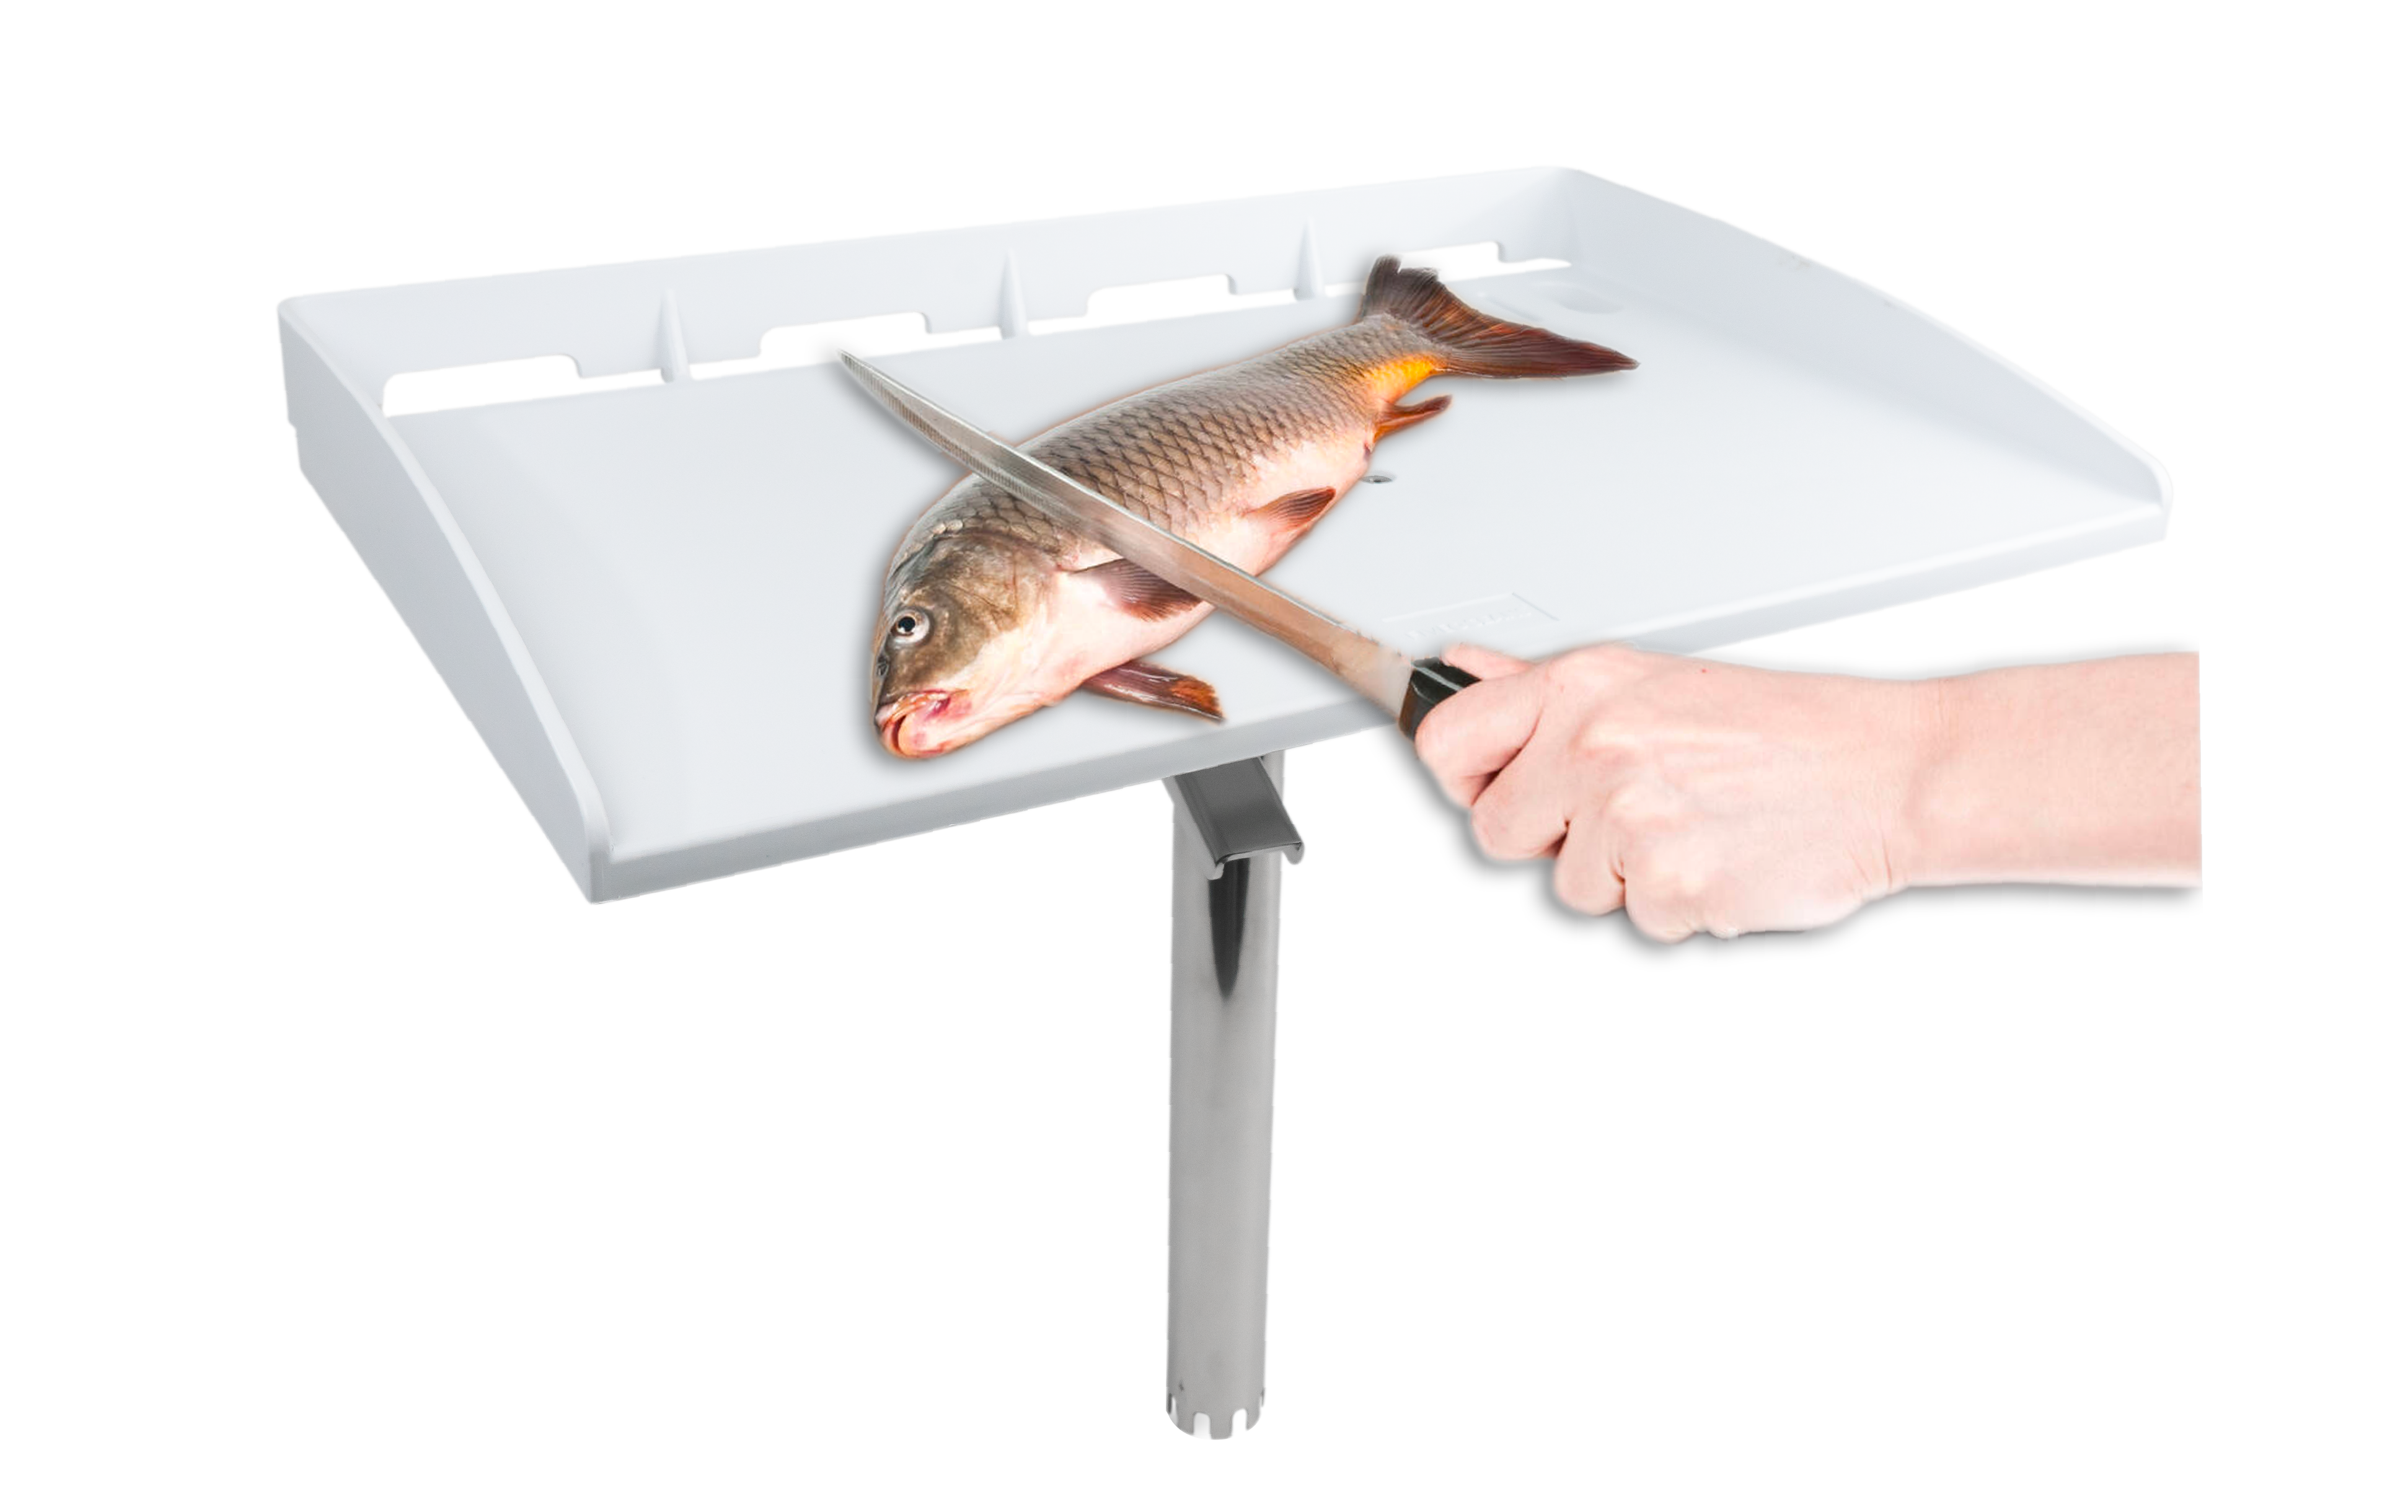 THE VERSATILITY AND UTILITY OF FILLET TABLES IN BOATING